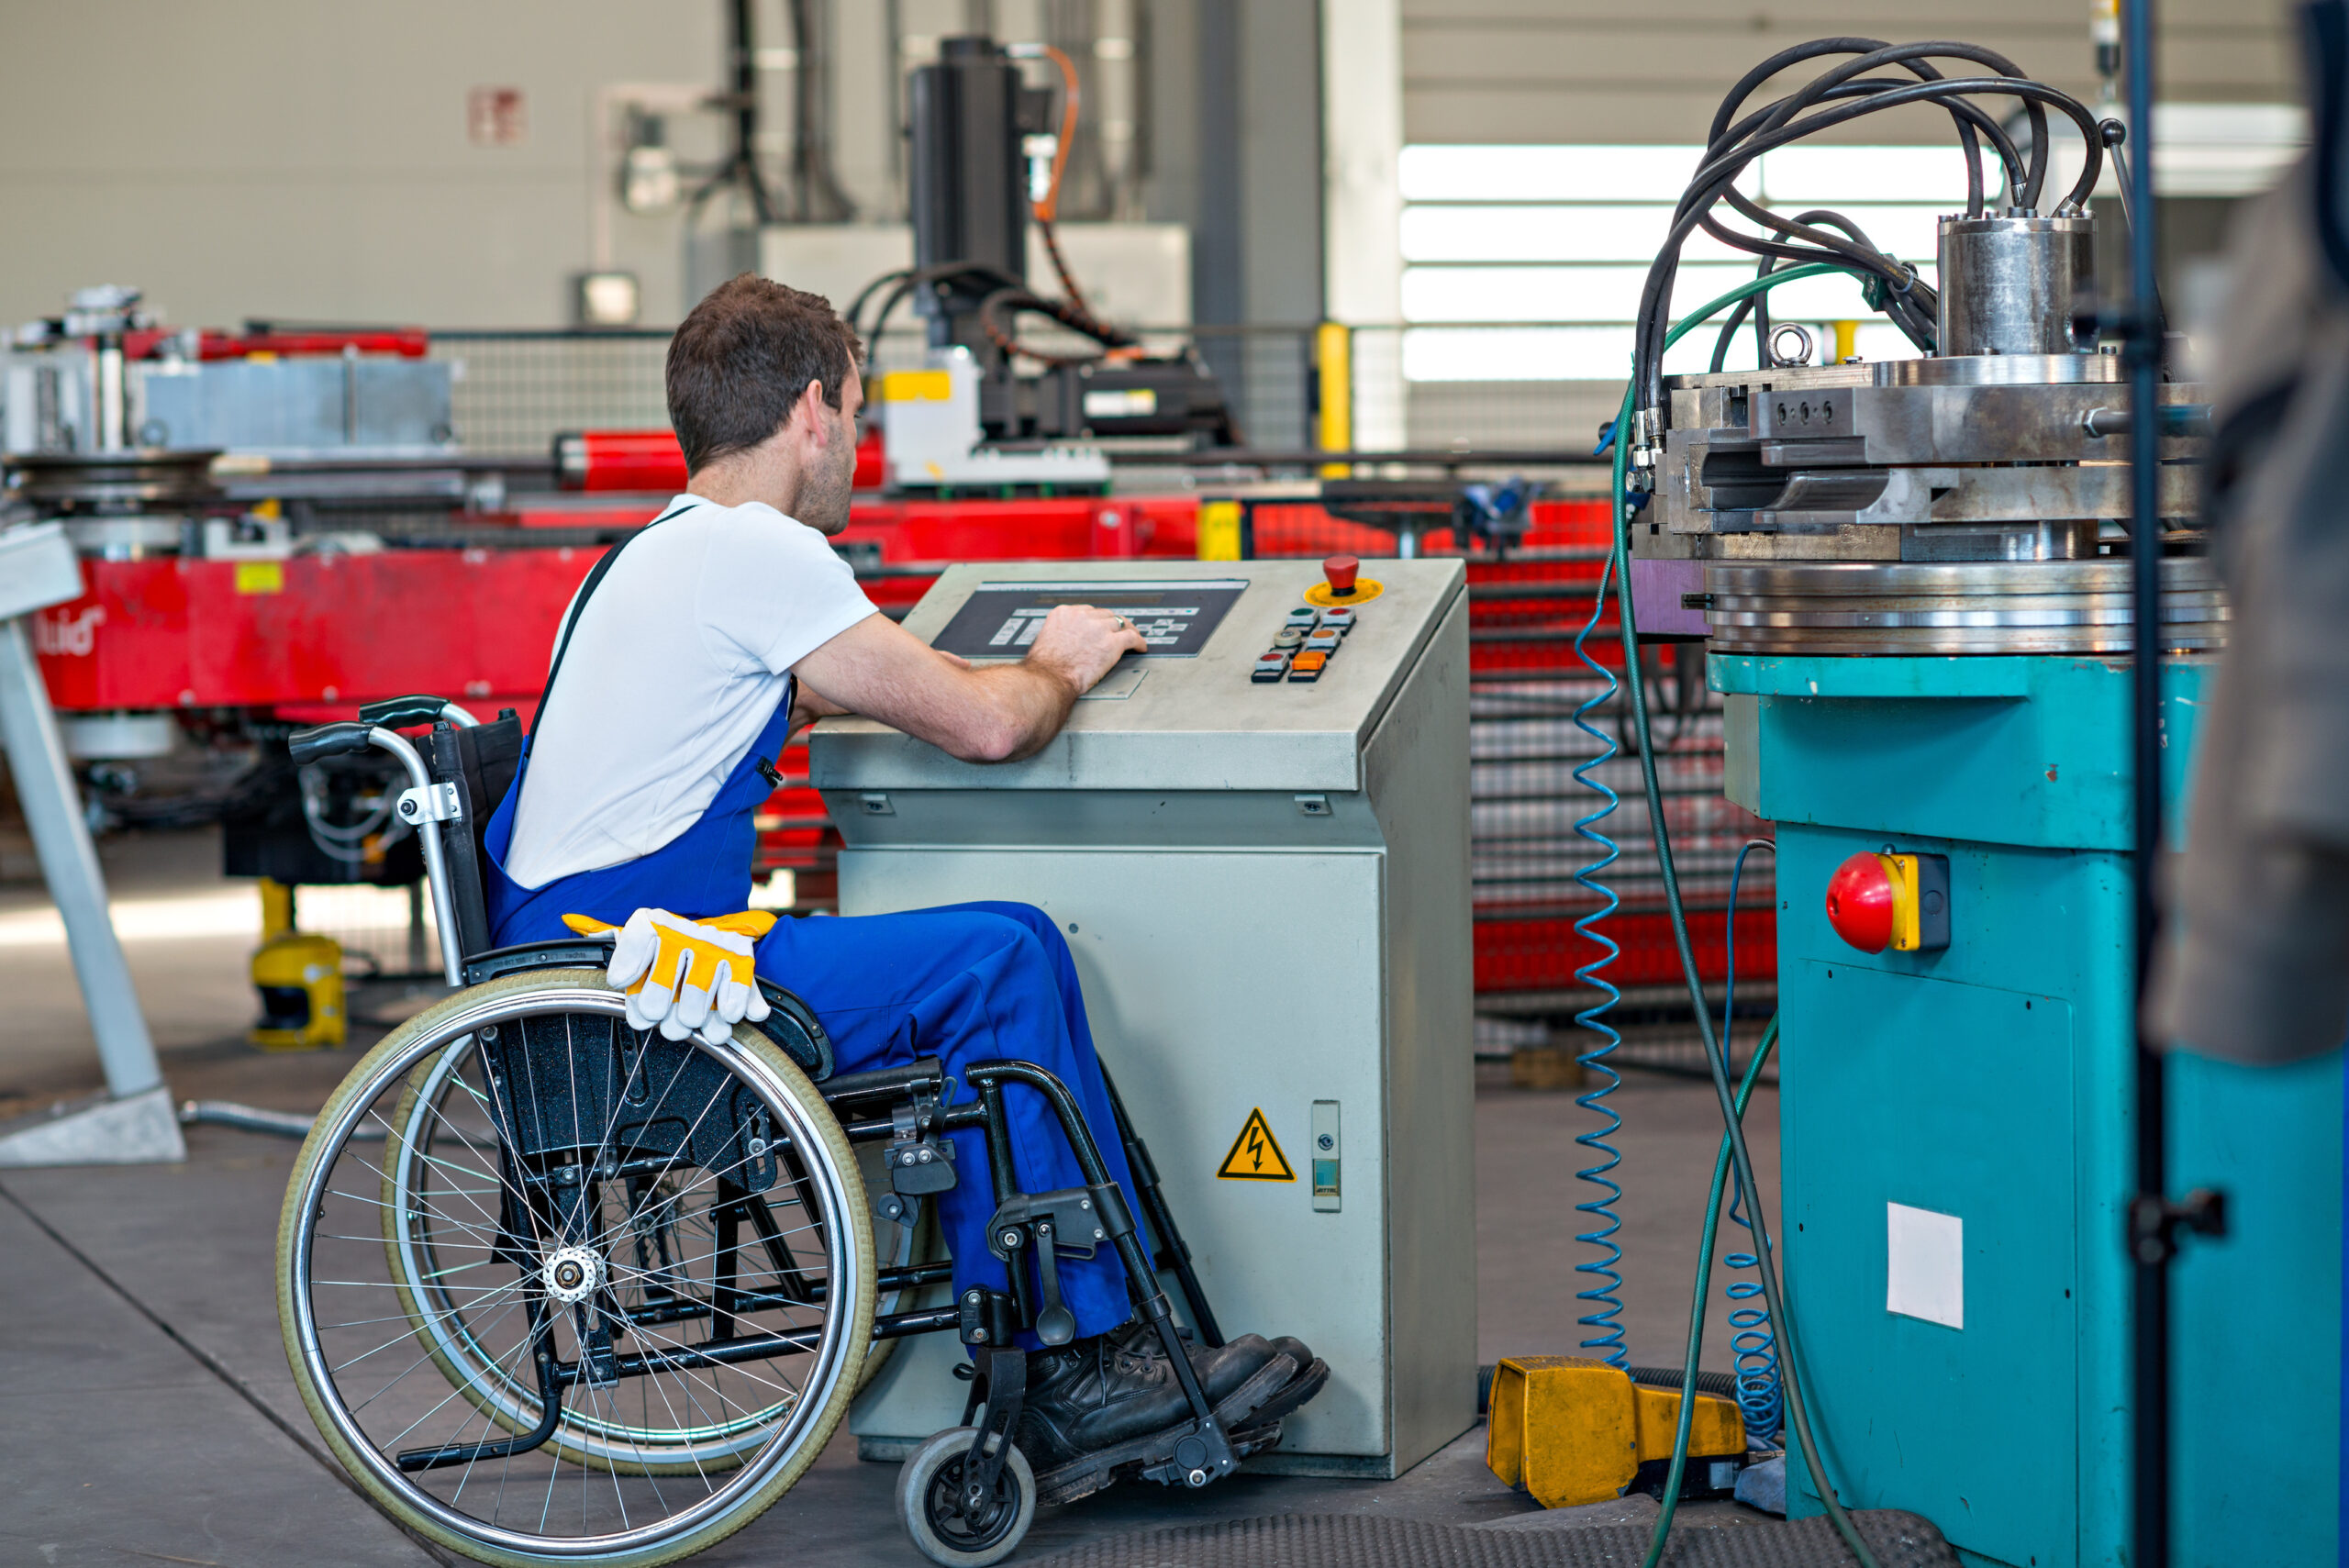 Worker with a disability operating a machine in a factory from his wheelchair.